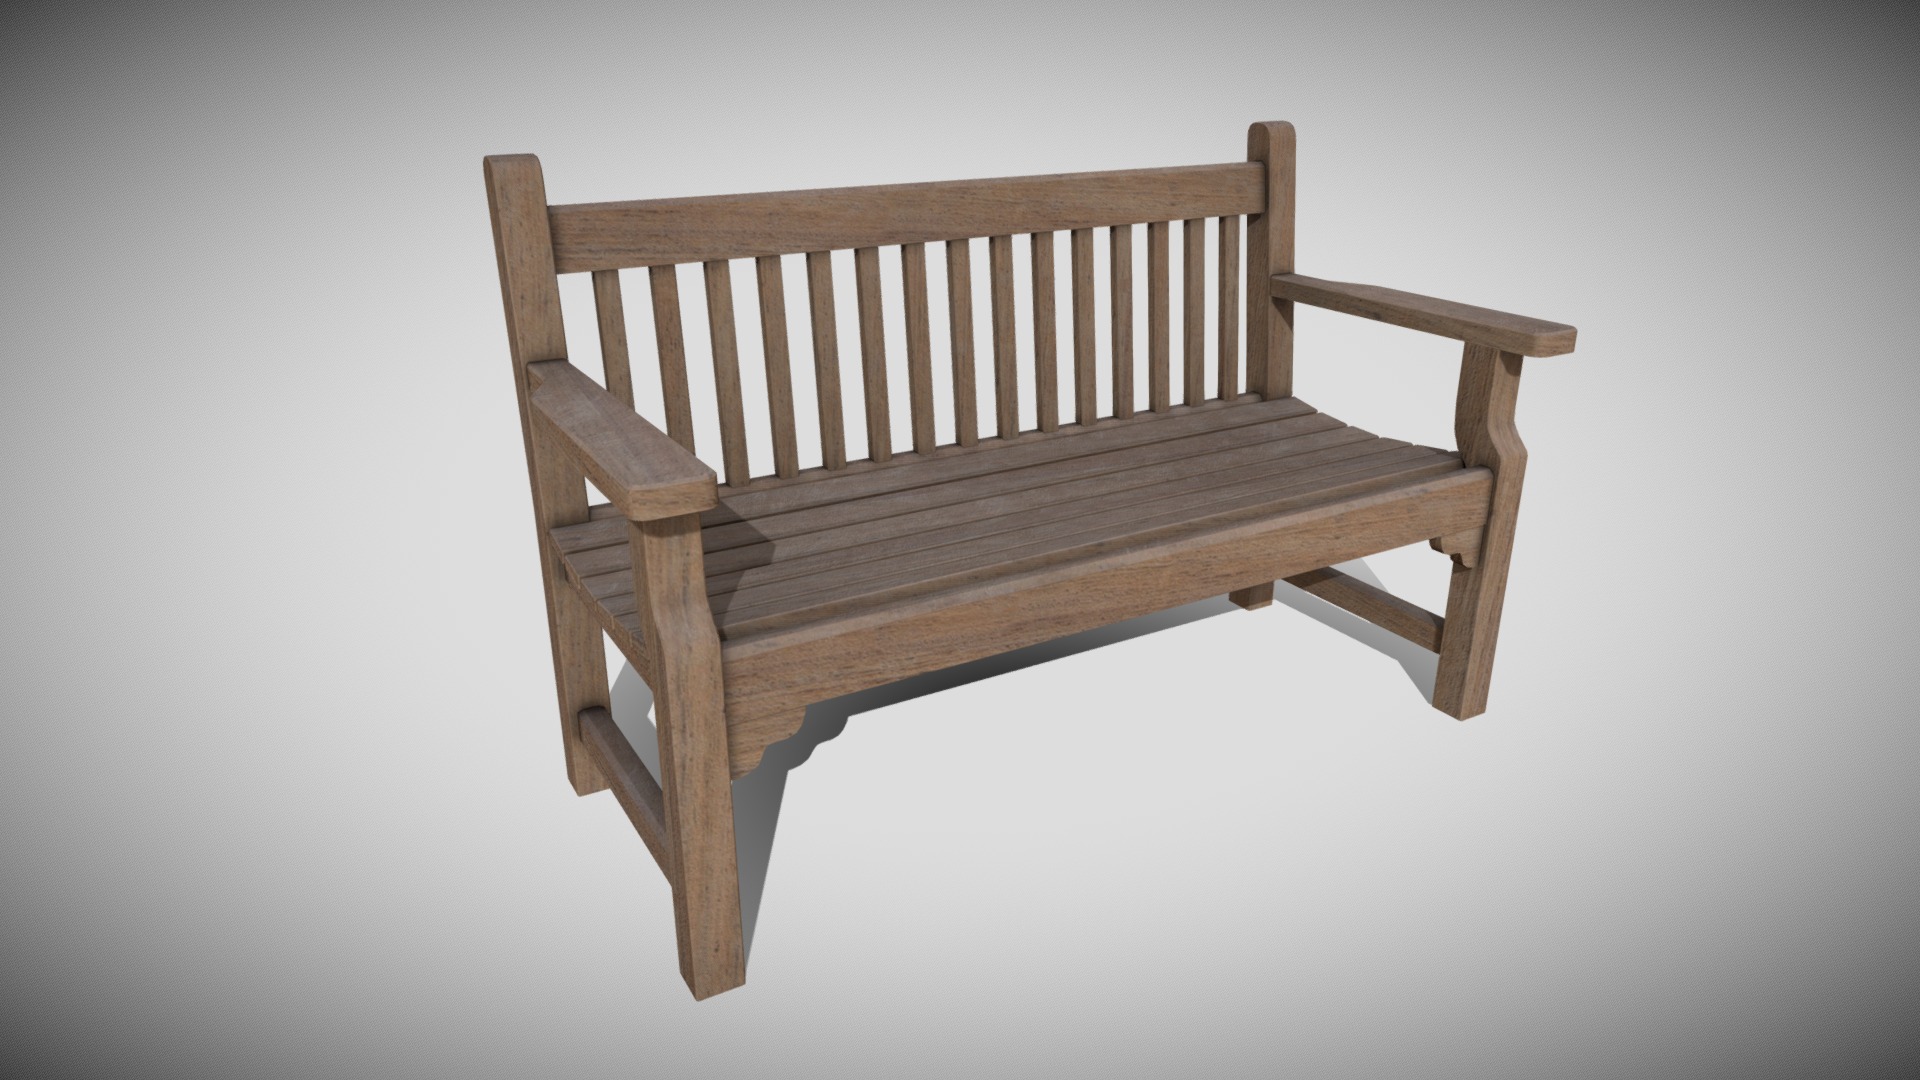 3D model Garden Bench 2 - This is a 3D model of the Garden Bench 2. The 3D model is about a wooden bench with a seat.